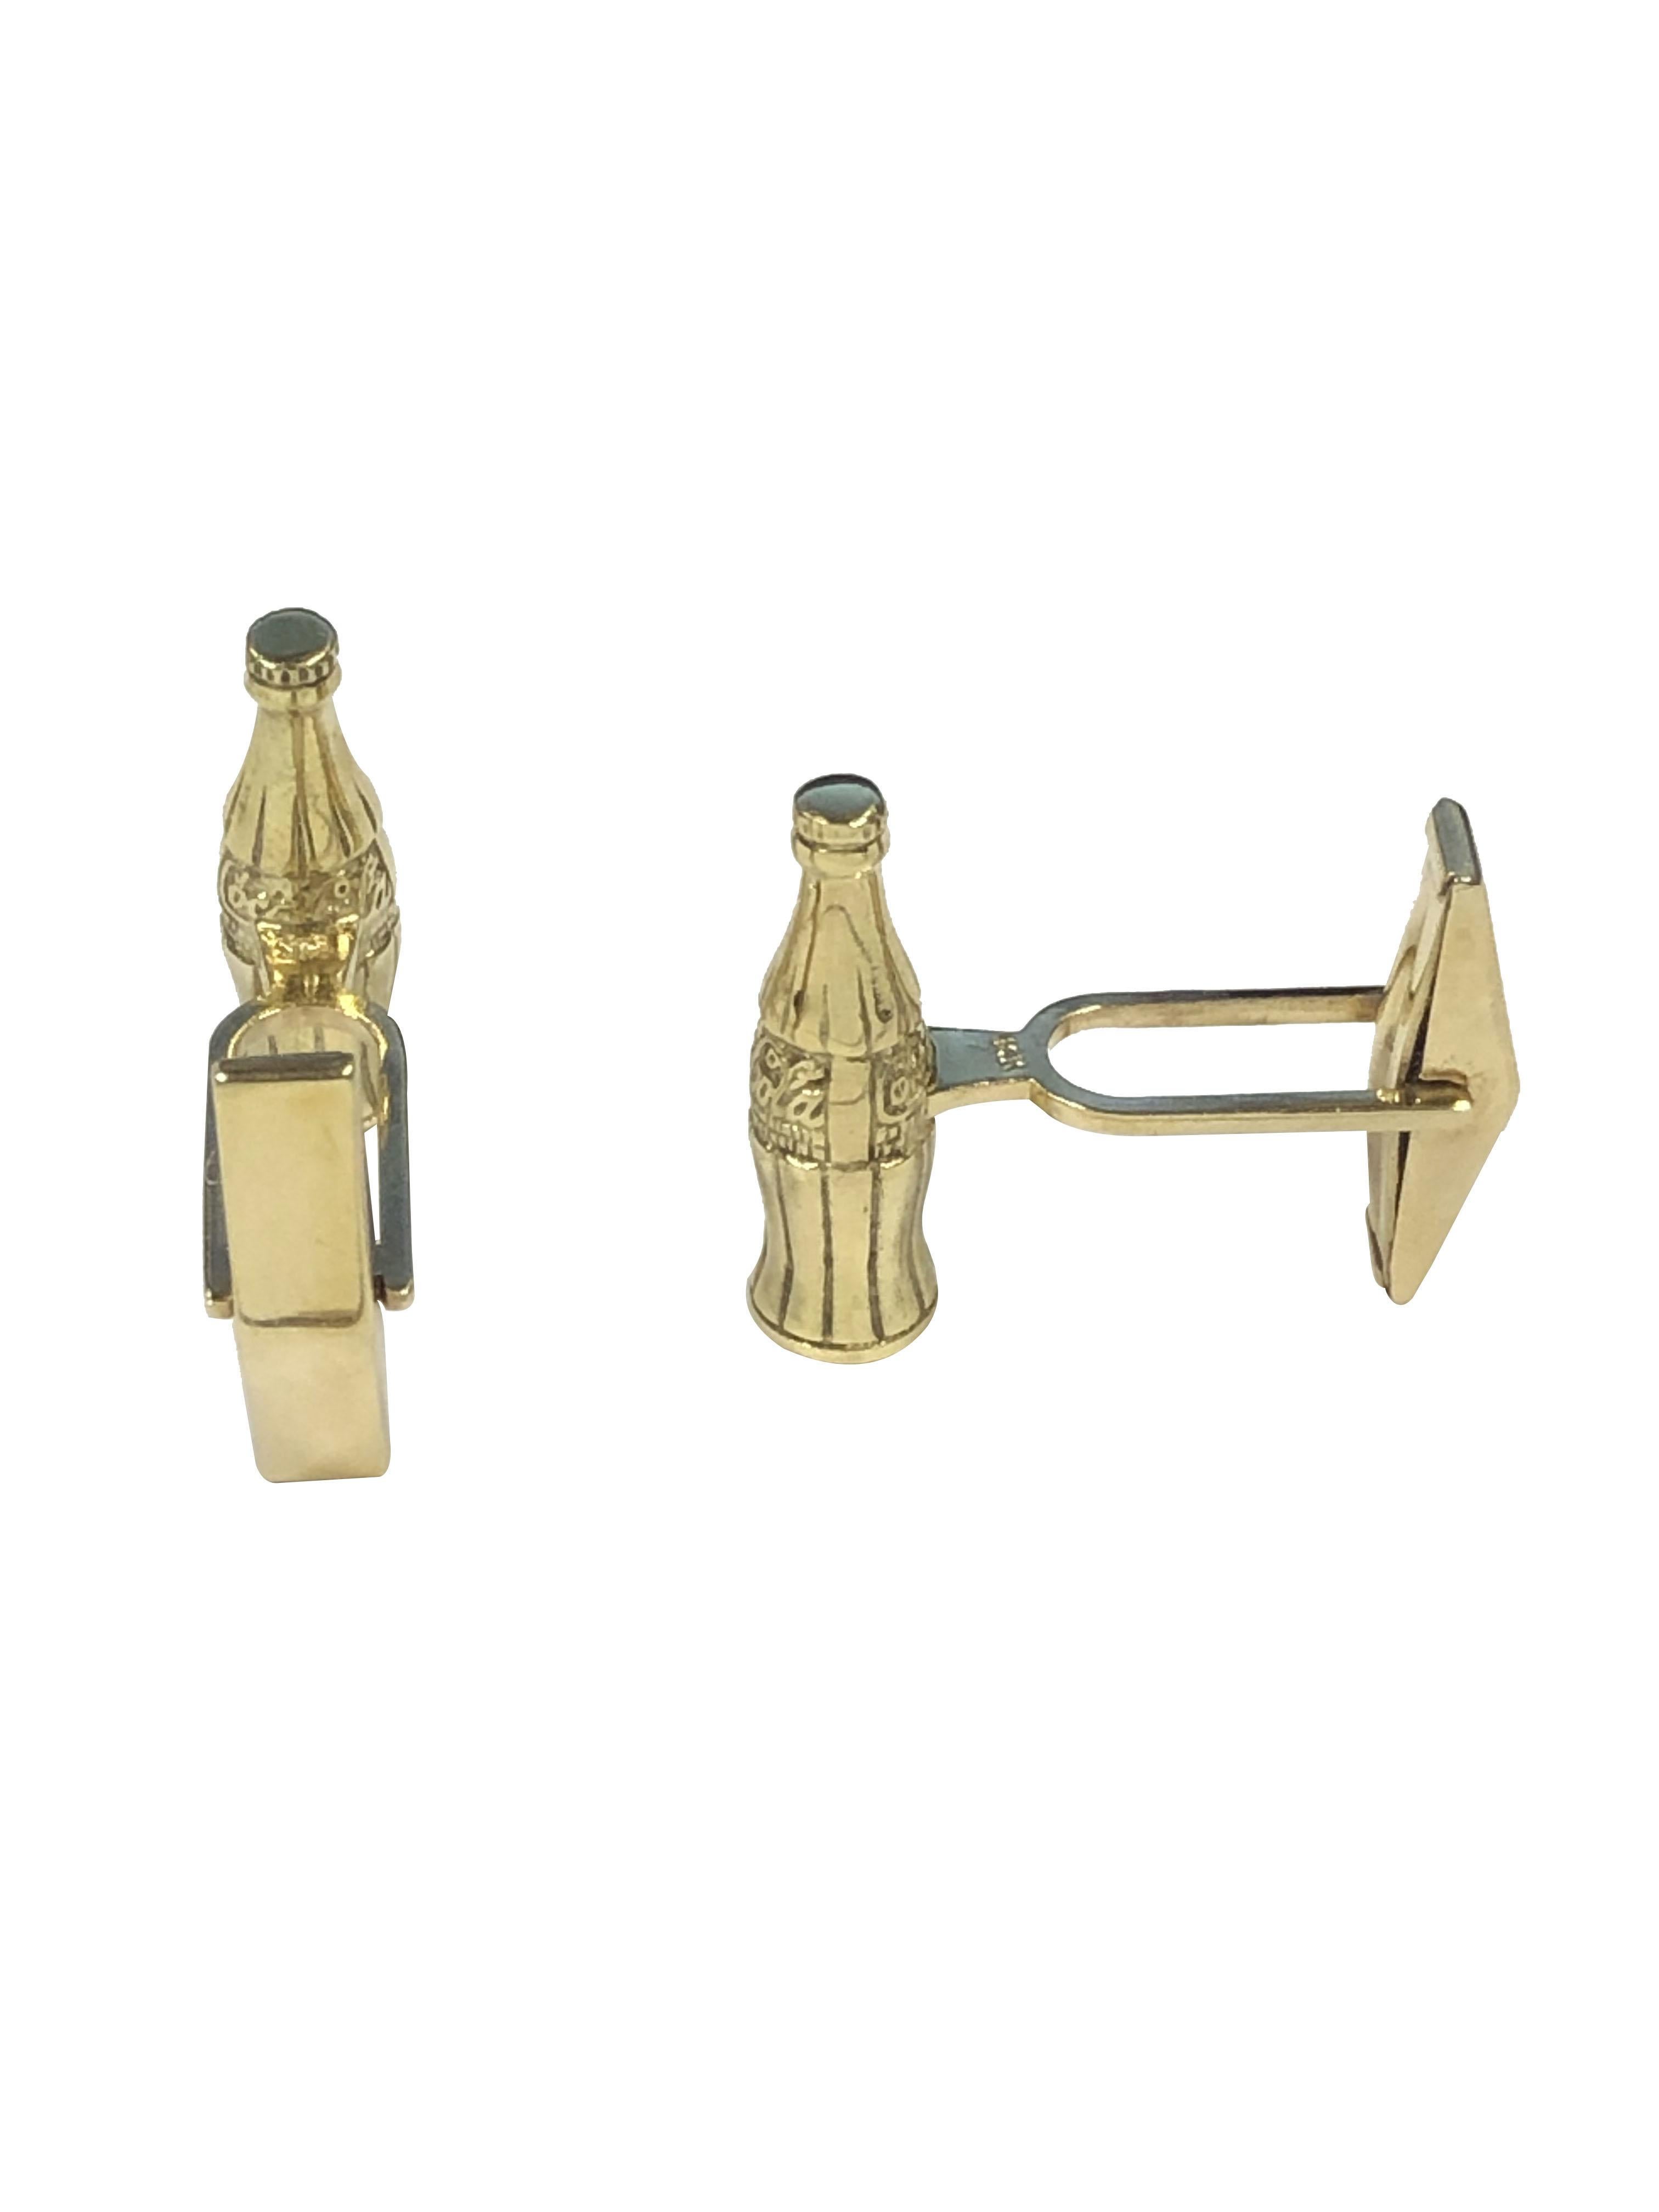 Circa 1970s 14k yellow Gold Coca Cola Bottle form cufflinks rumored to have been a presentation to Coca Cola Company executives. Measuring 3/4 inch in length x 1/4 inch wide and weighing 13 grams. toggle backs for easy on and off.